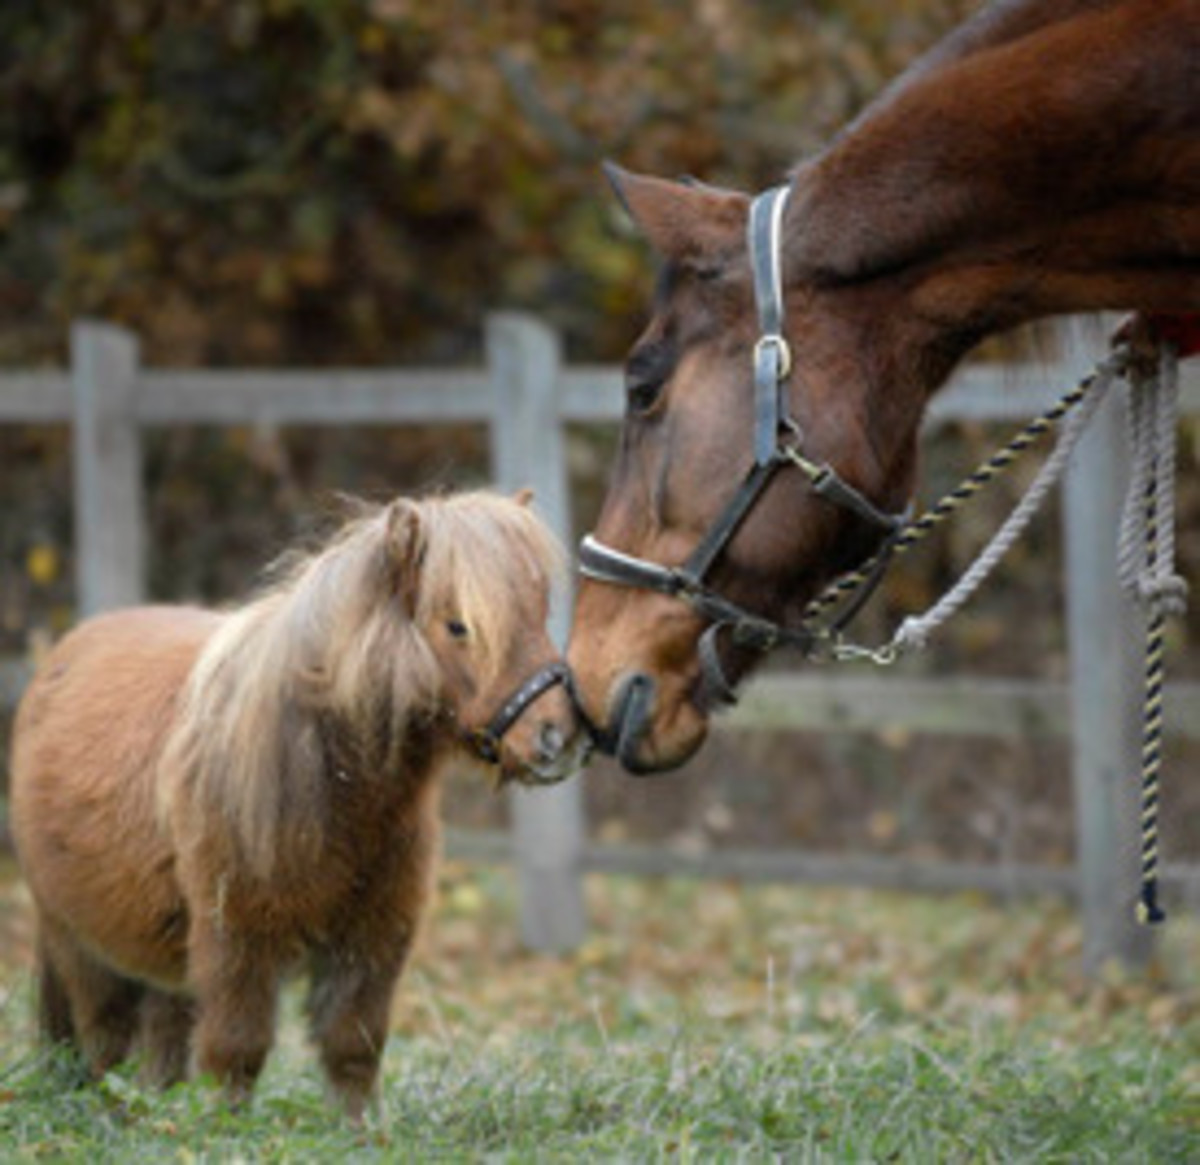 smallest horse in the world thumbelina